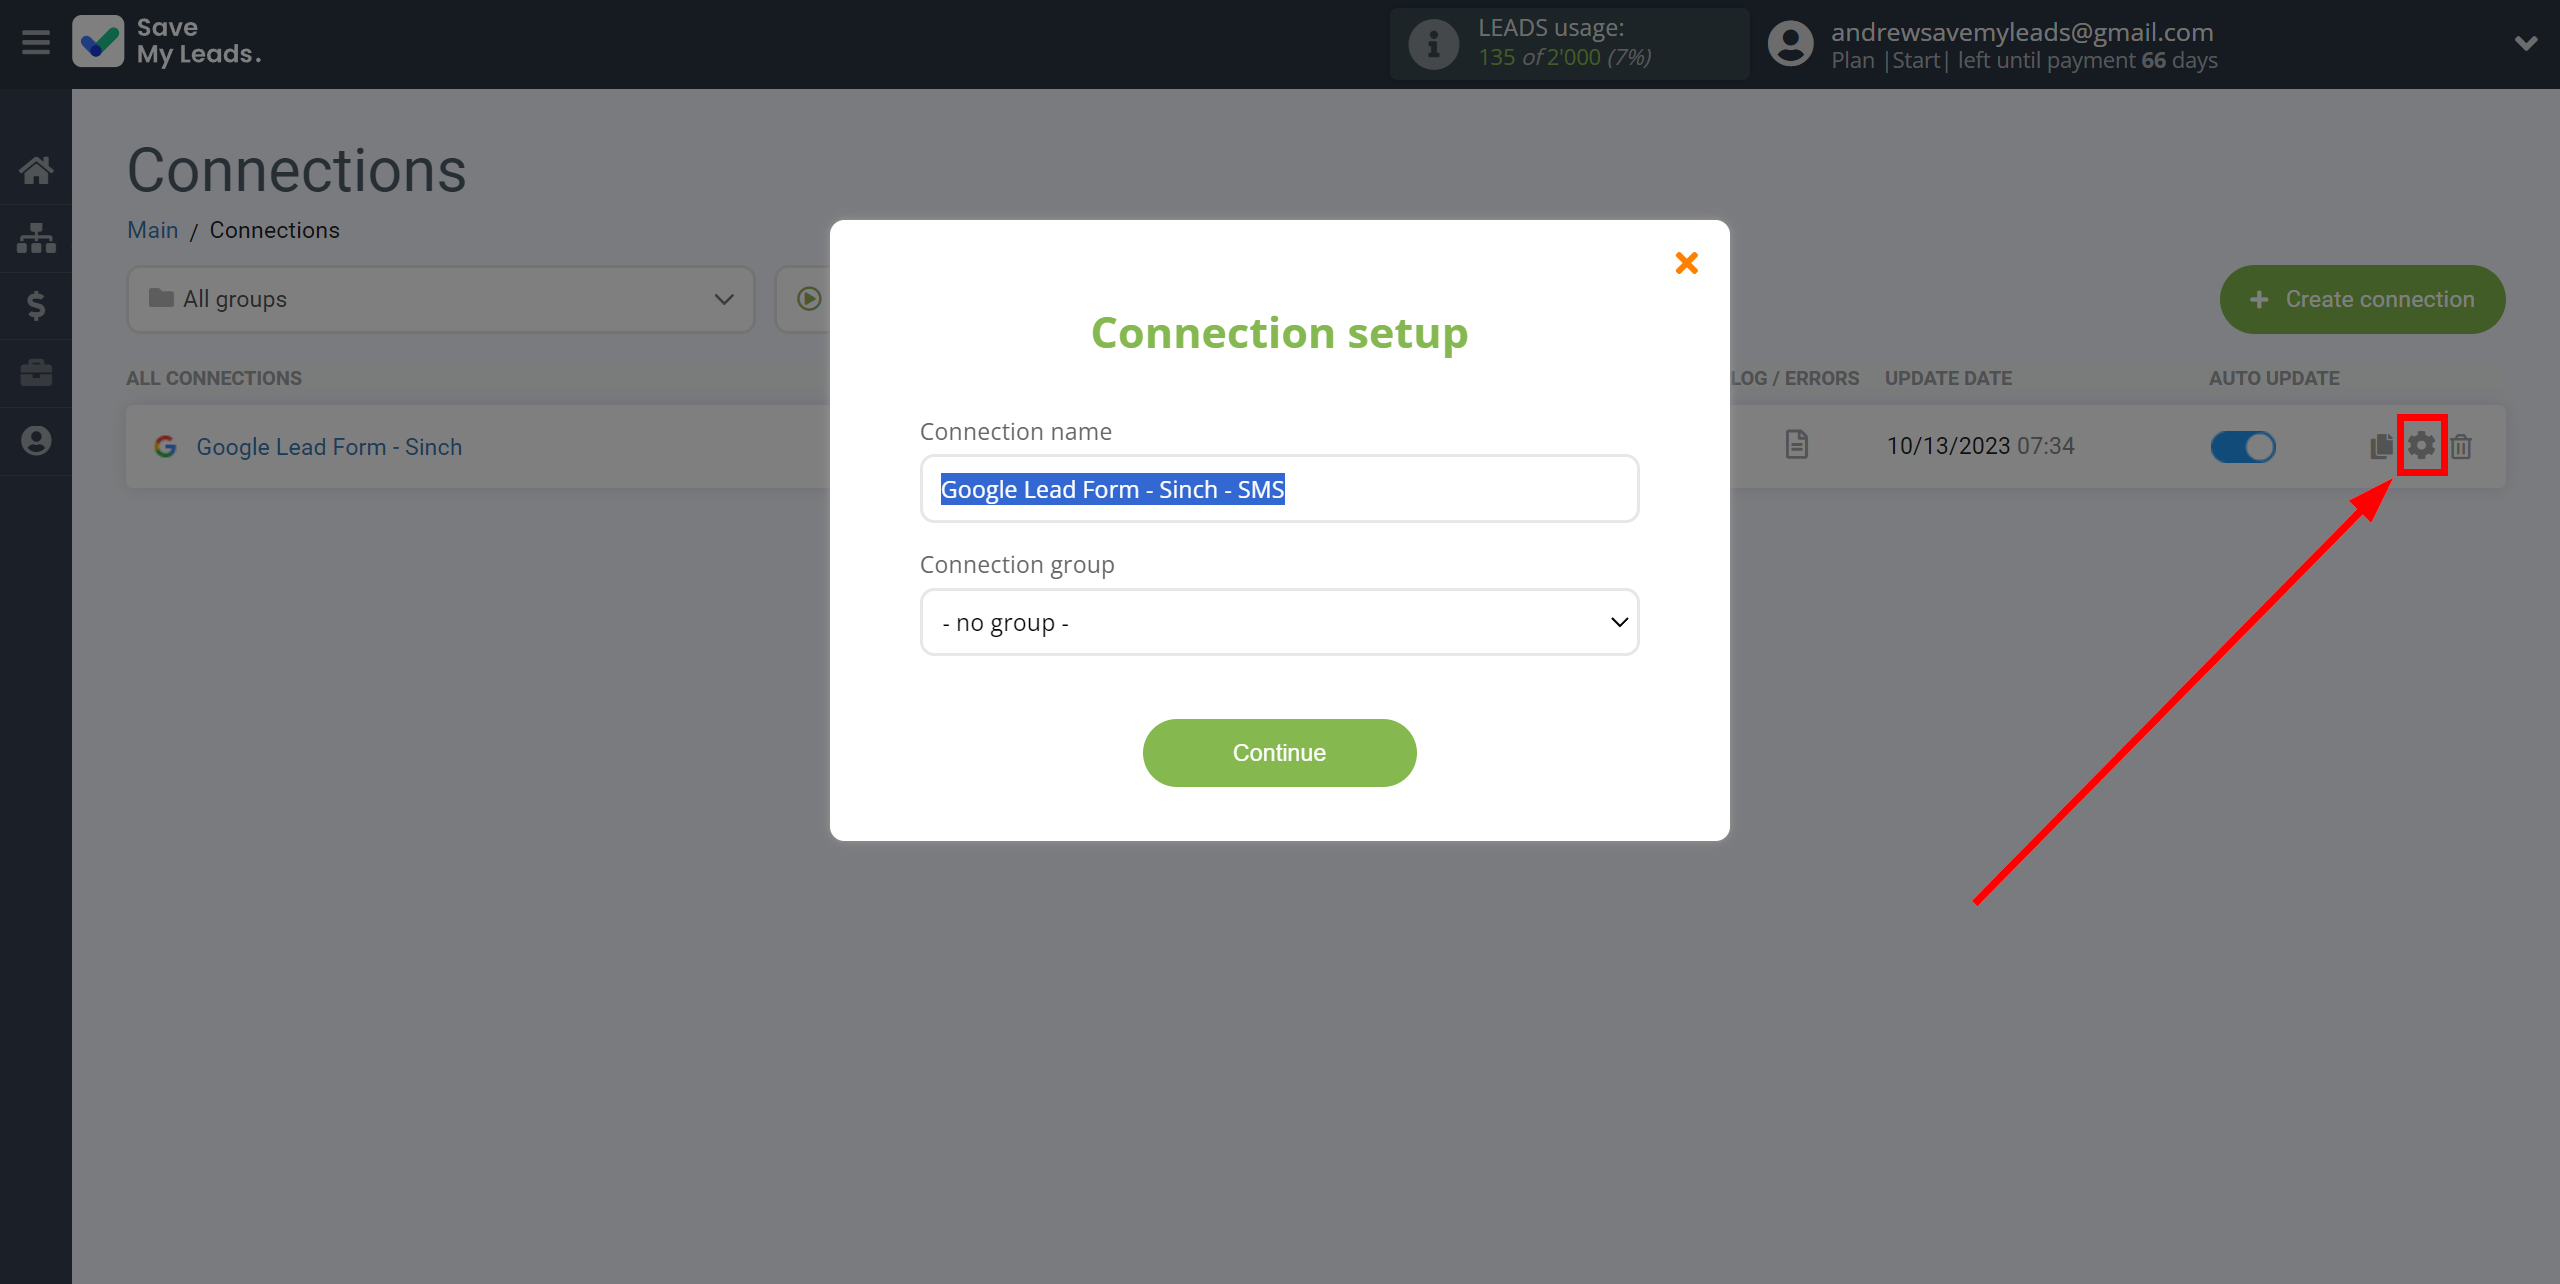 How to Connect Google Lead Form with Sinch | Name and group connection